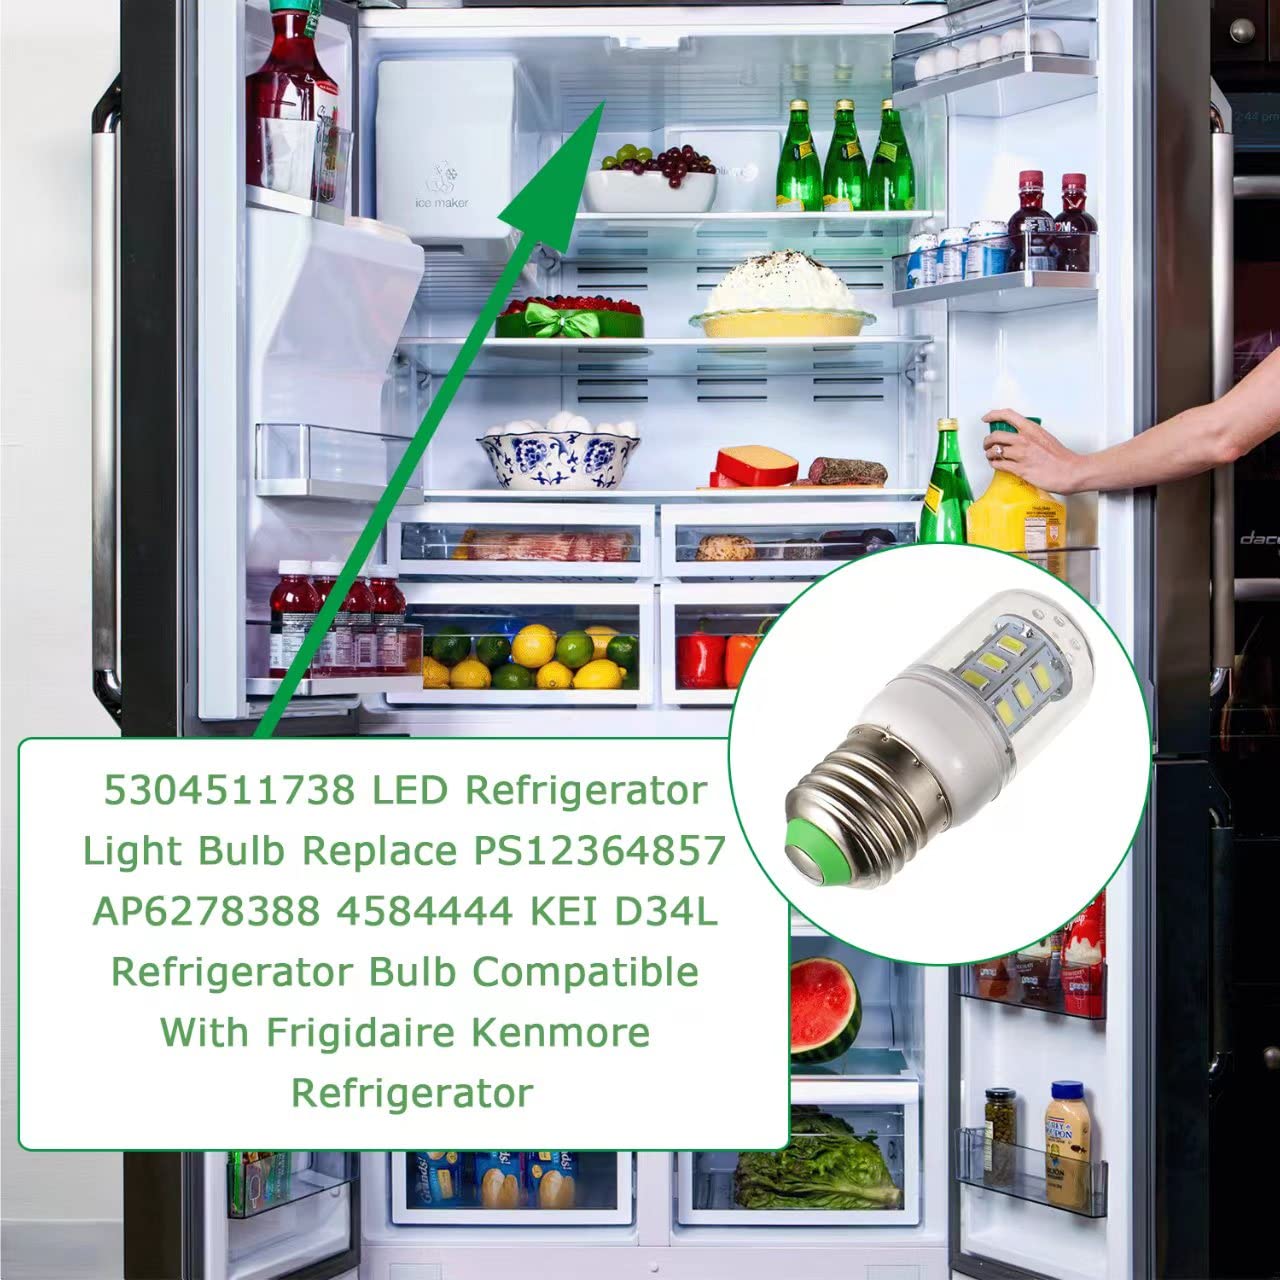 SIGANDG 5304511738 Refrigerator Light Bulbs 3.5W for Kenmore Frigidaire Electrolux PS12364857 AP6278388 4584444 KEI D34L (Pack of 2)